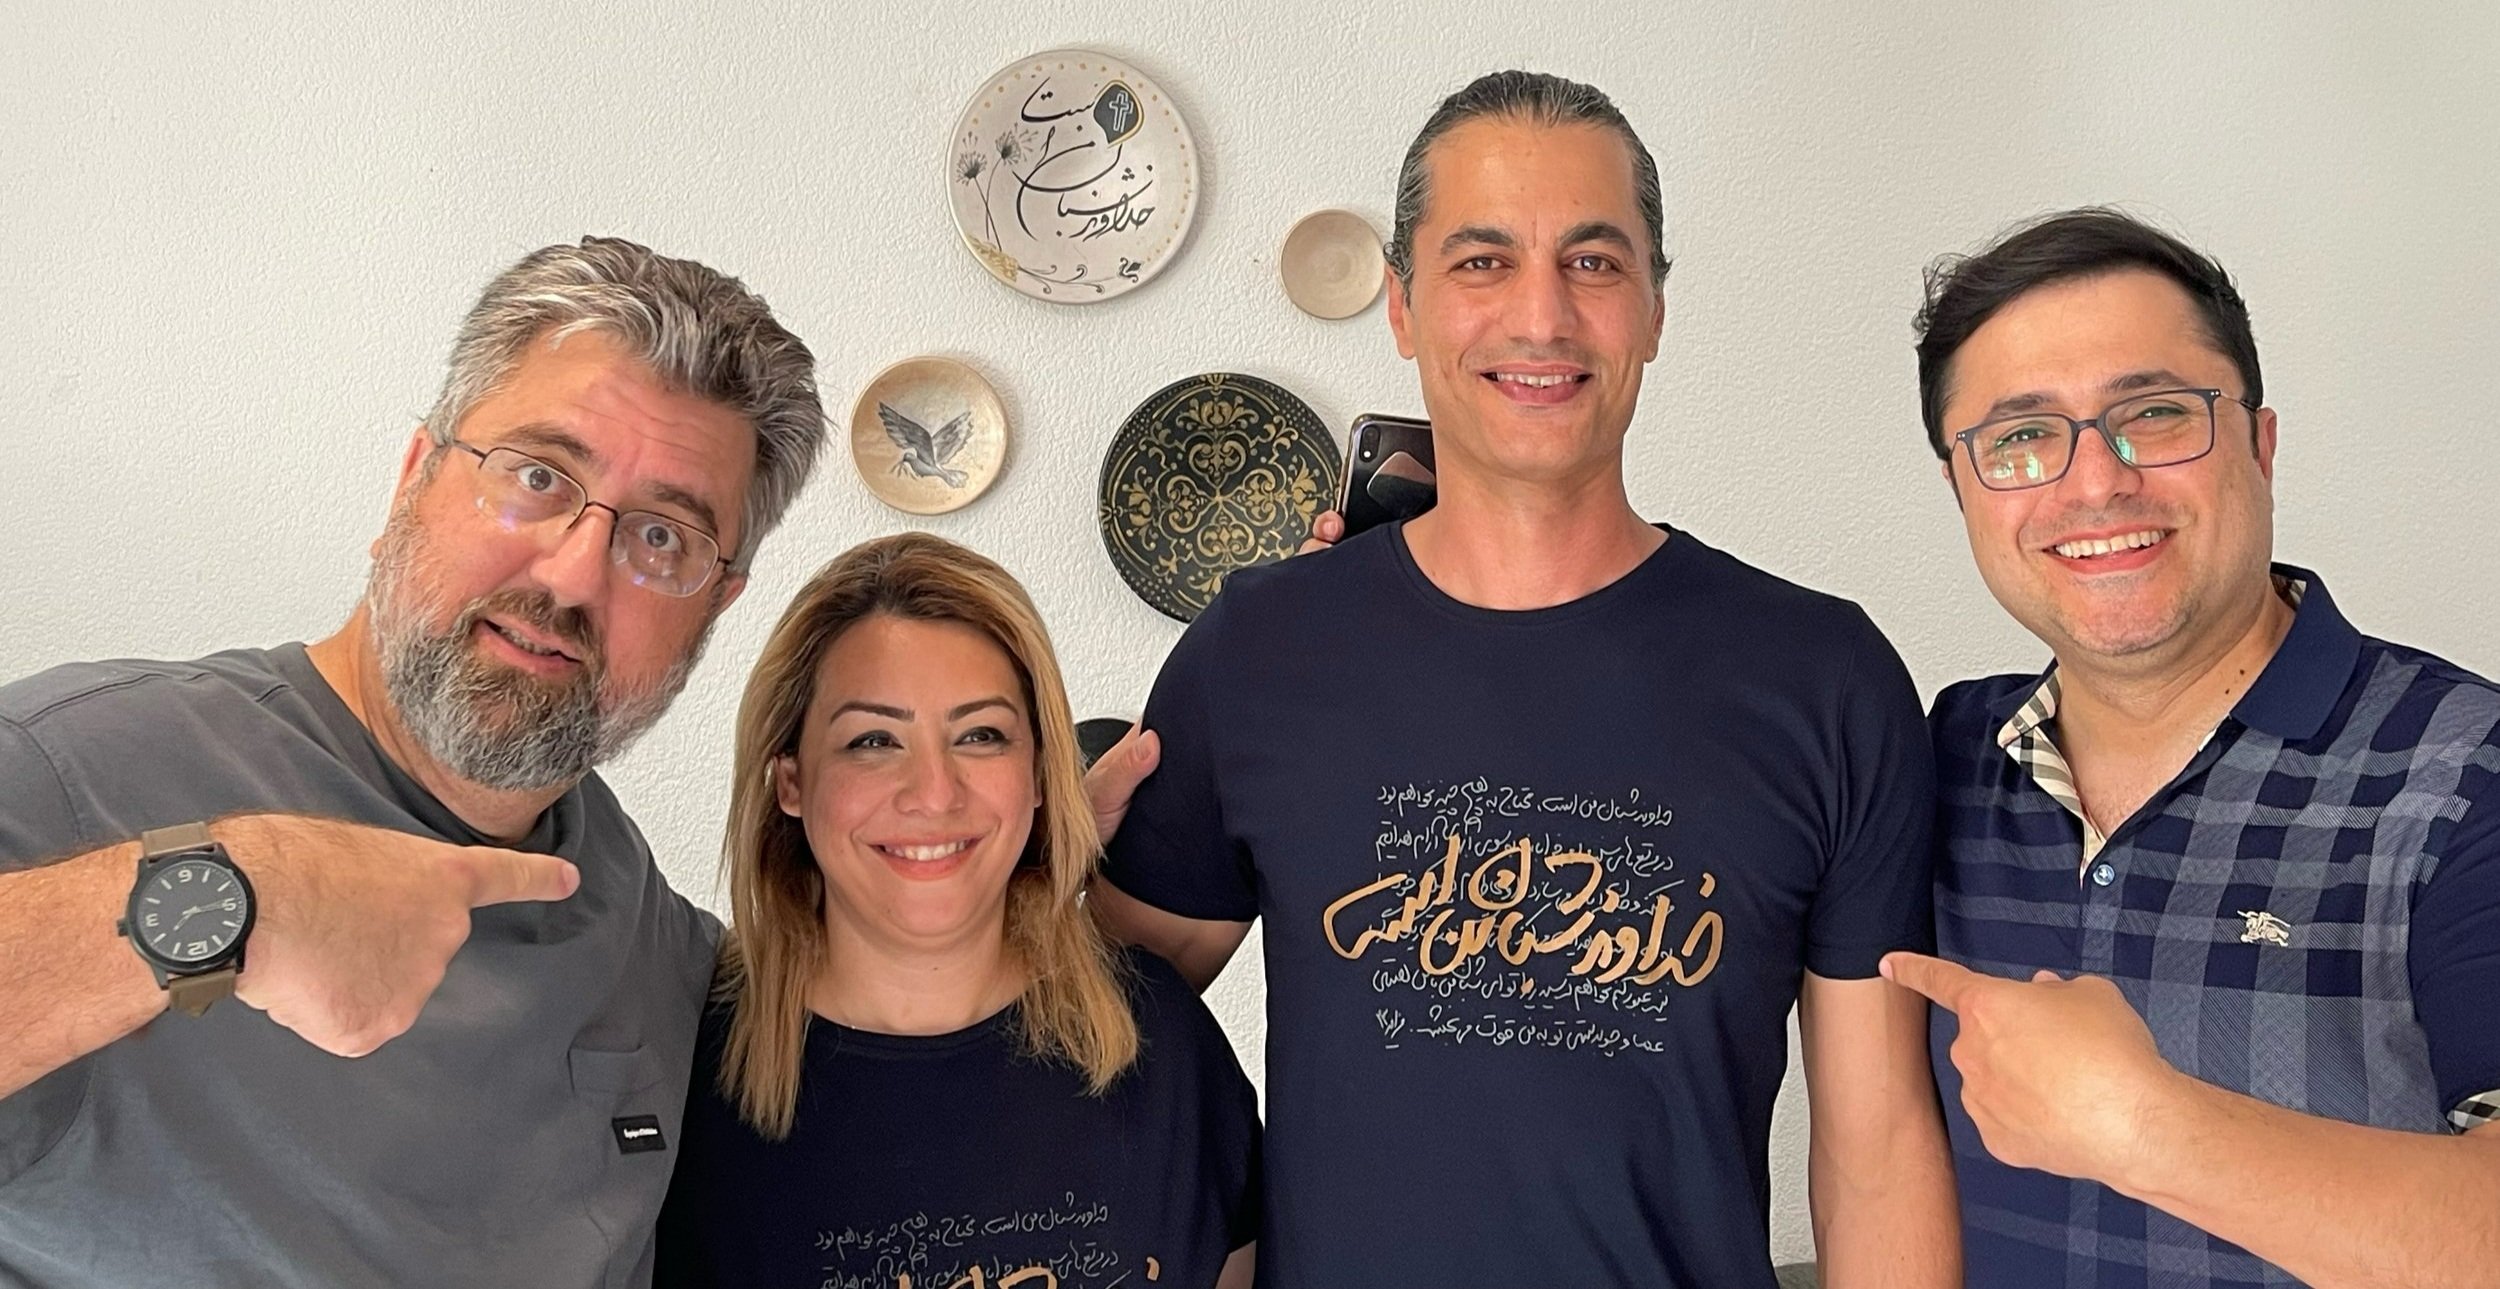   Asafeh and Rambod wearing Psalm 23 shirts with Psalm 23 in the background on wall-mounted plates. Surrounding them are Sasan and Dariush.  